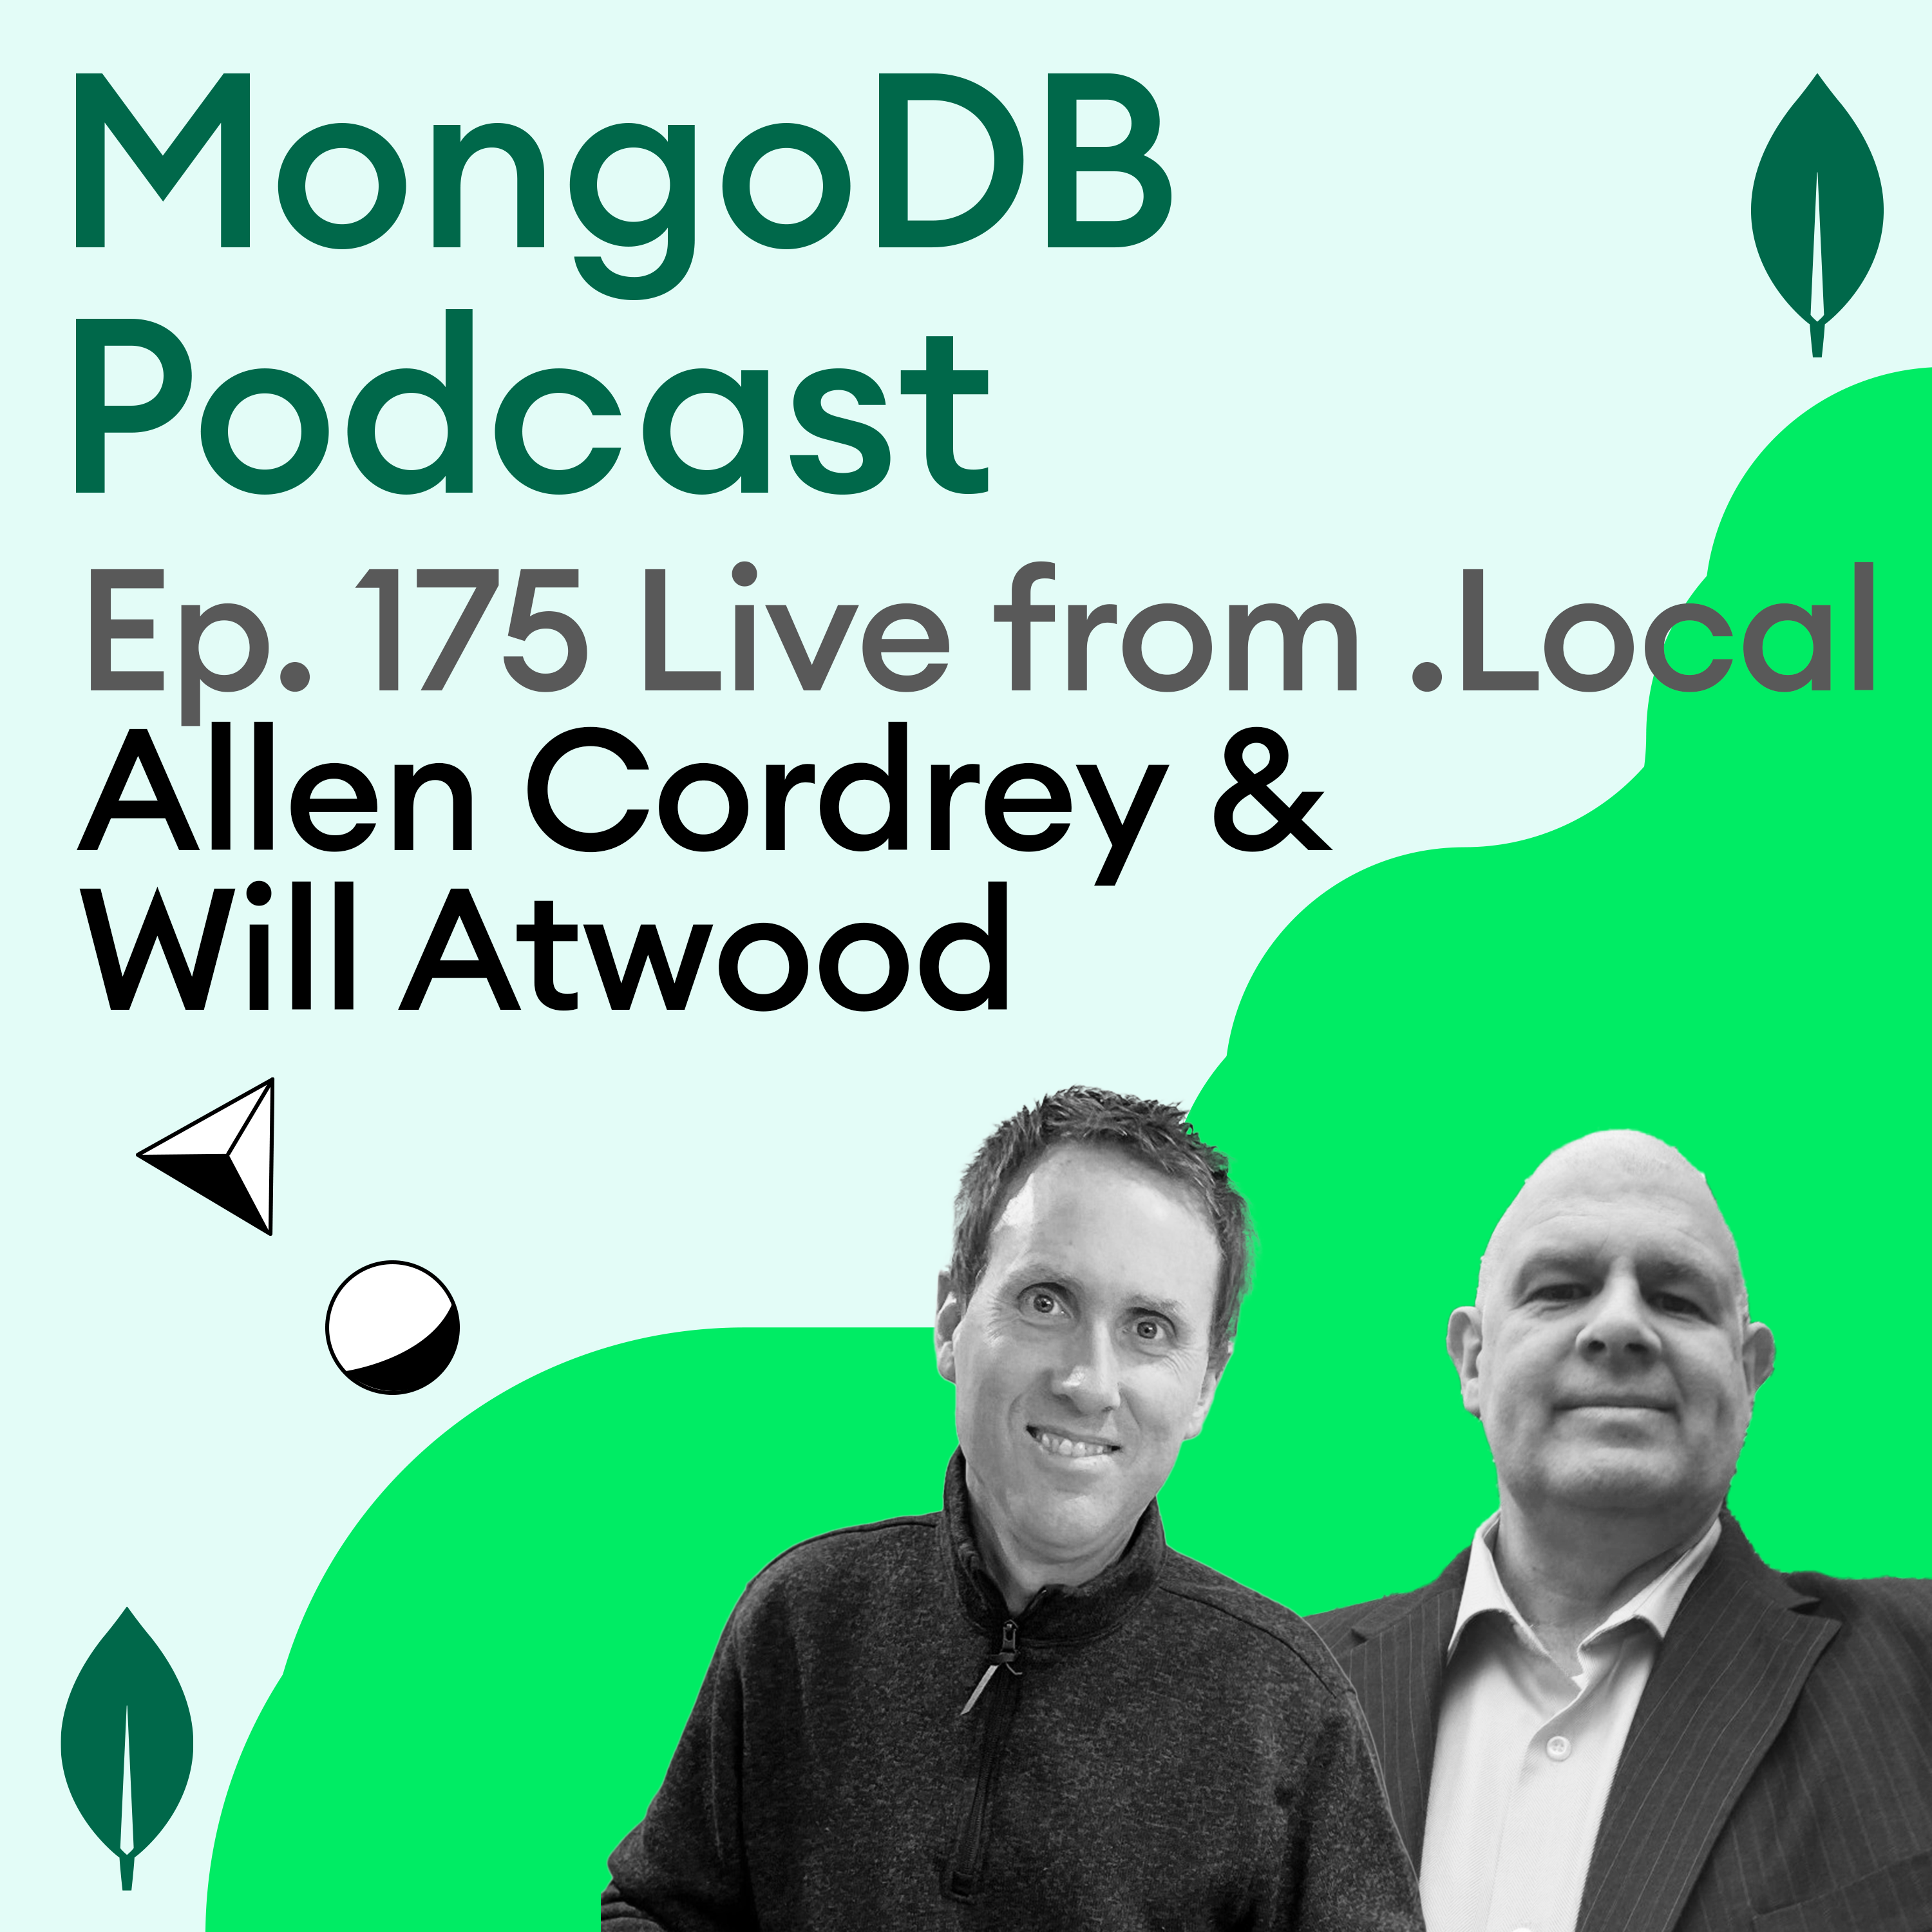 Ep. 175: The Power of Community with Allen Cordrey and Will Atwood